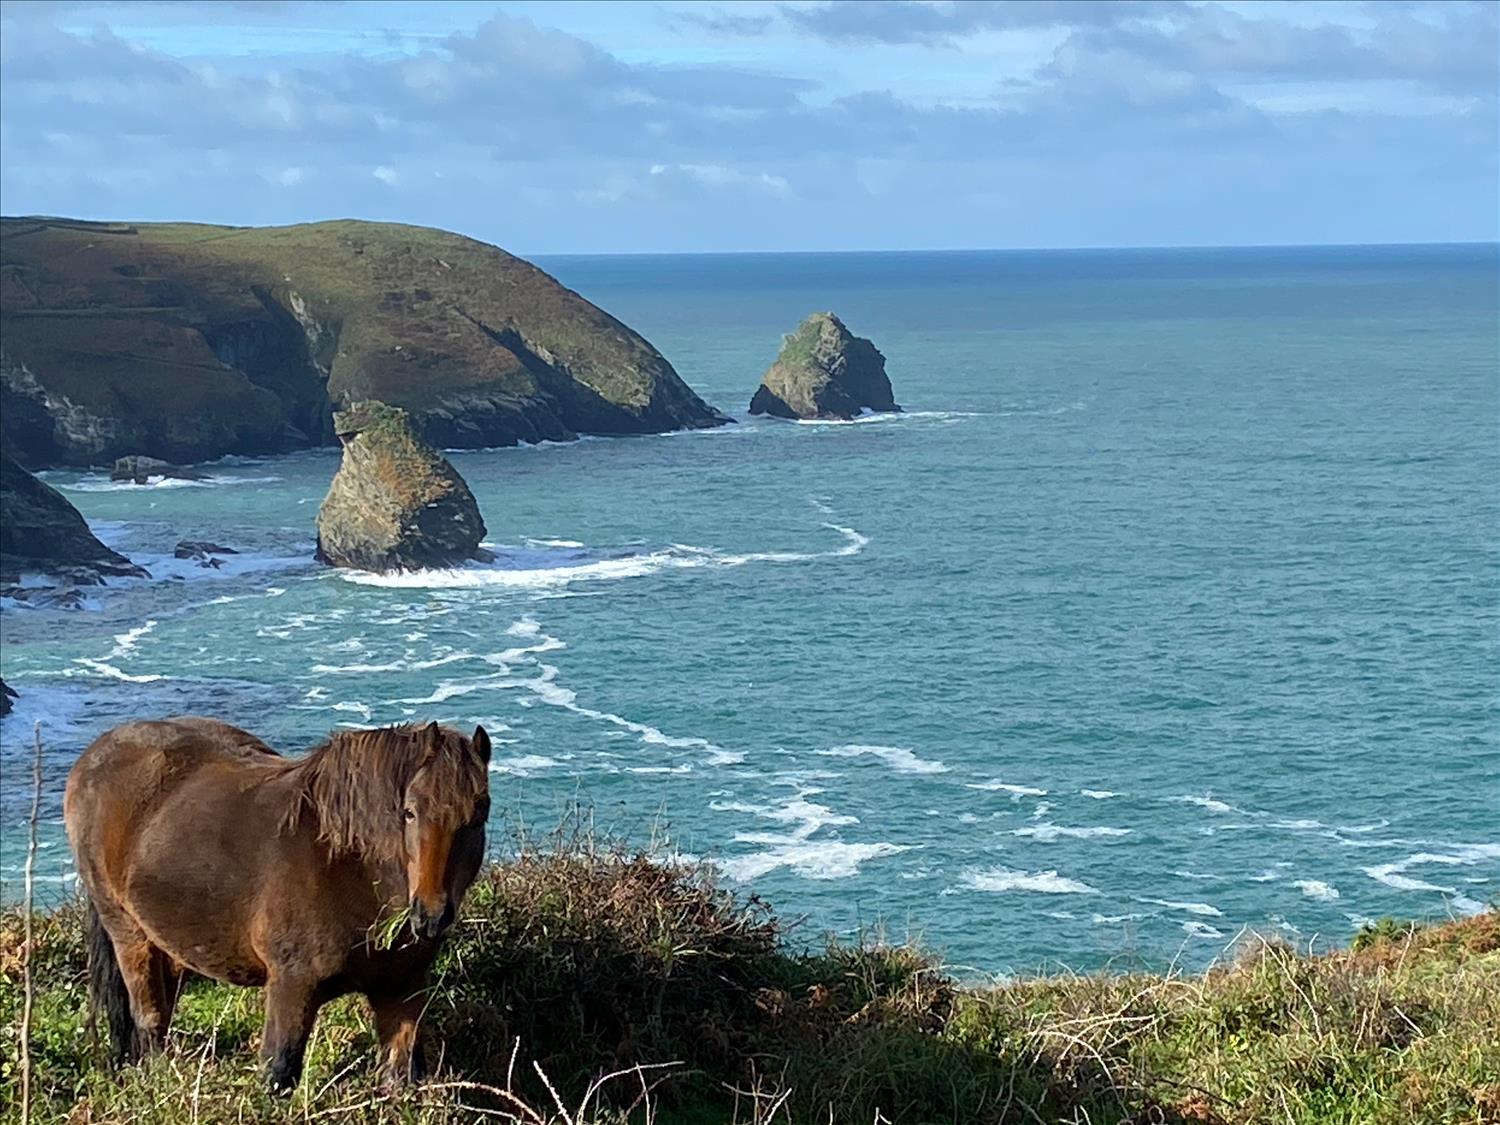 In the foreground, a pony enjoying a healthy breakfast. In the background, Cornwall's Atlantic coastline between Boscastle and Tintagel